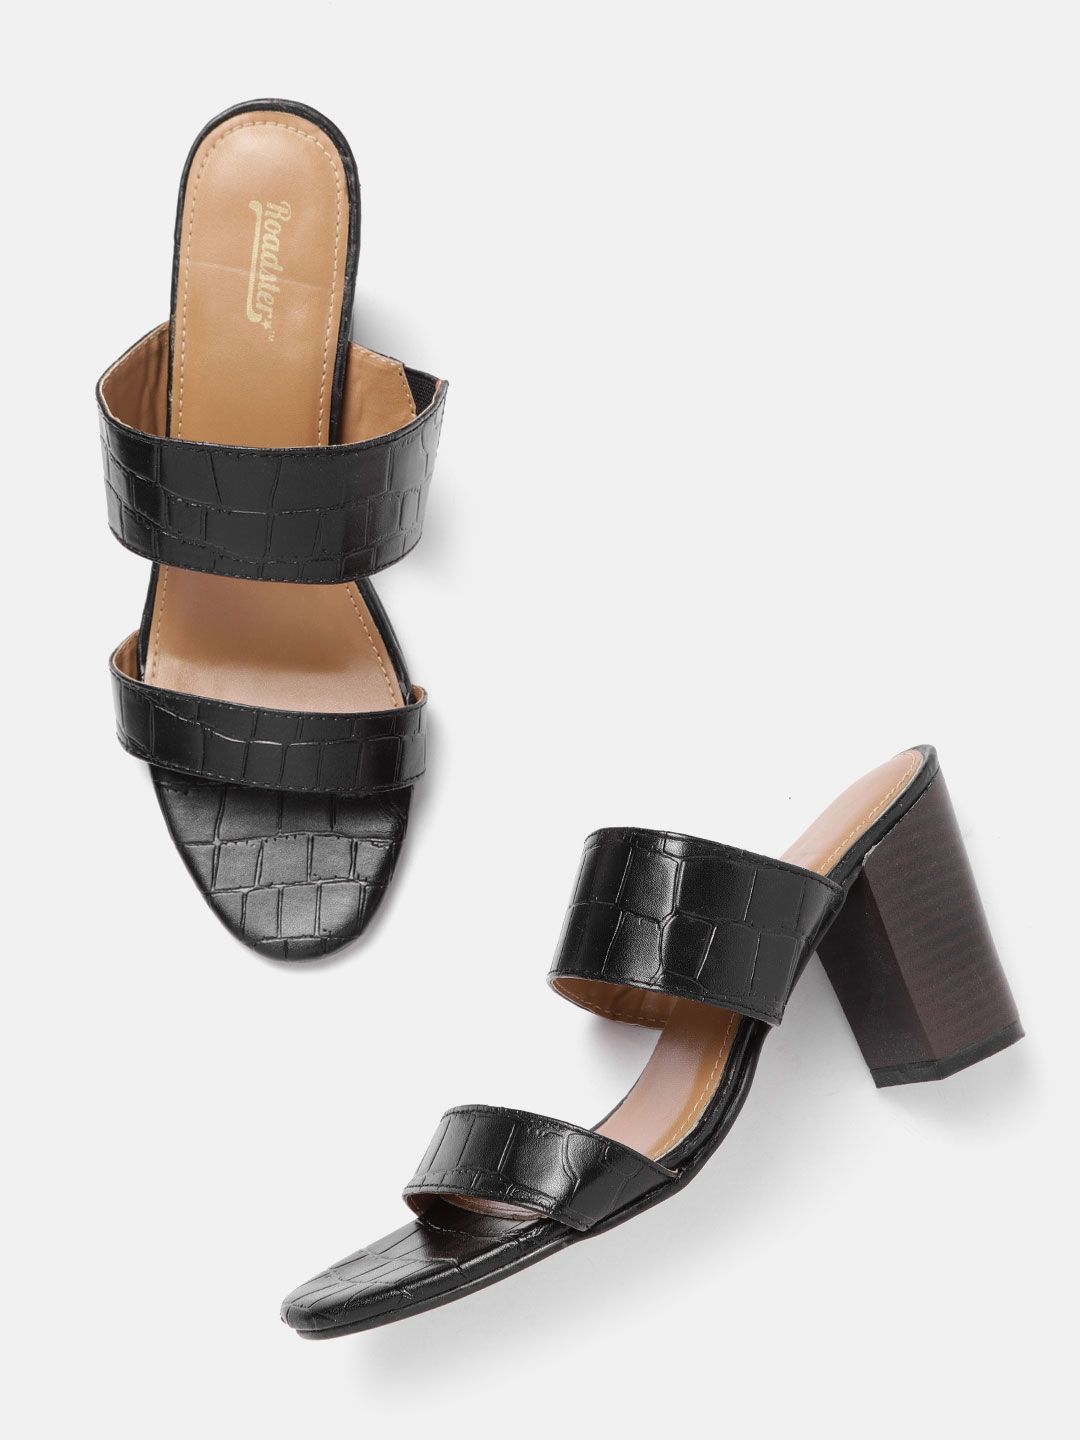 The Roadster Lifestyle Co Black Croc Textured Block Heels Price in India